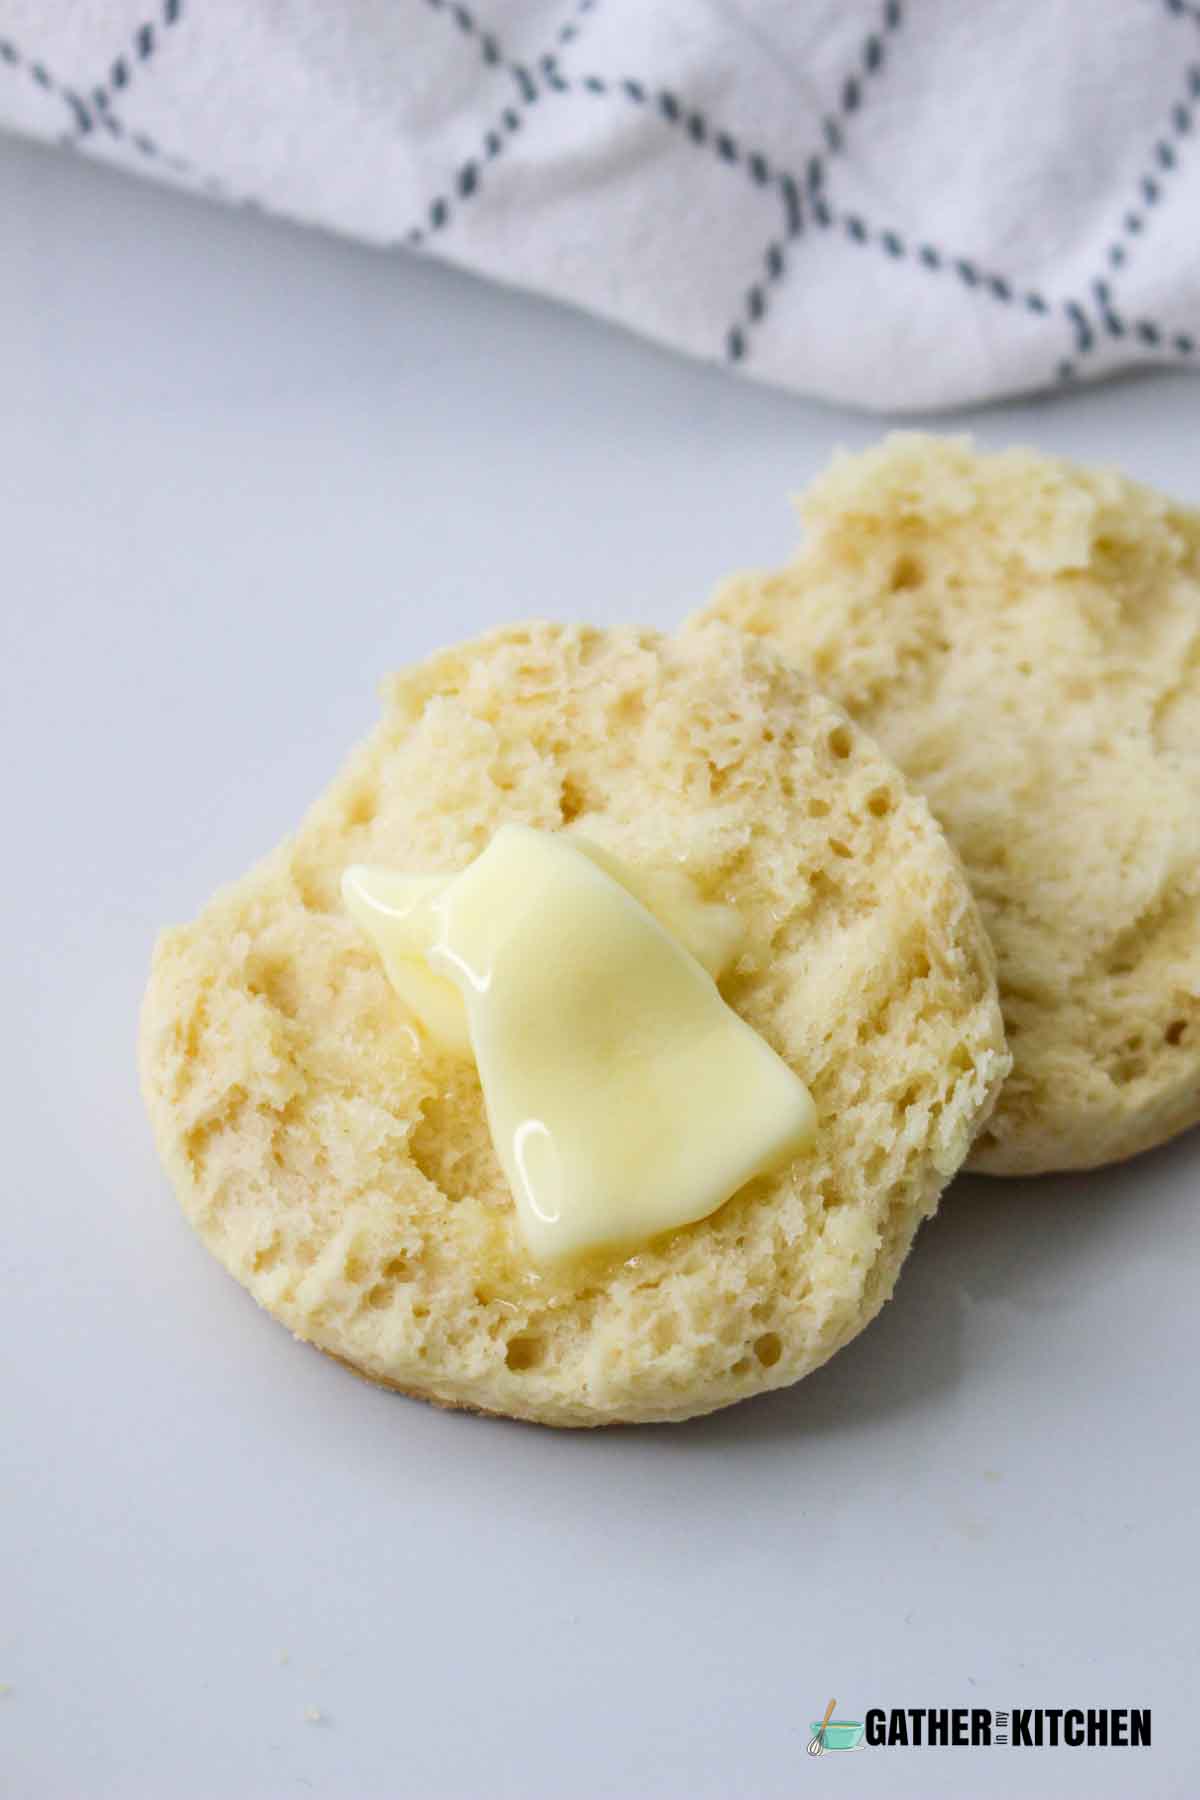 A crisco biscuit sliced in half with butter on it.